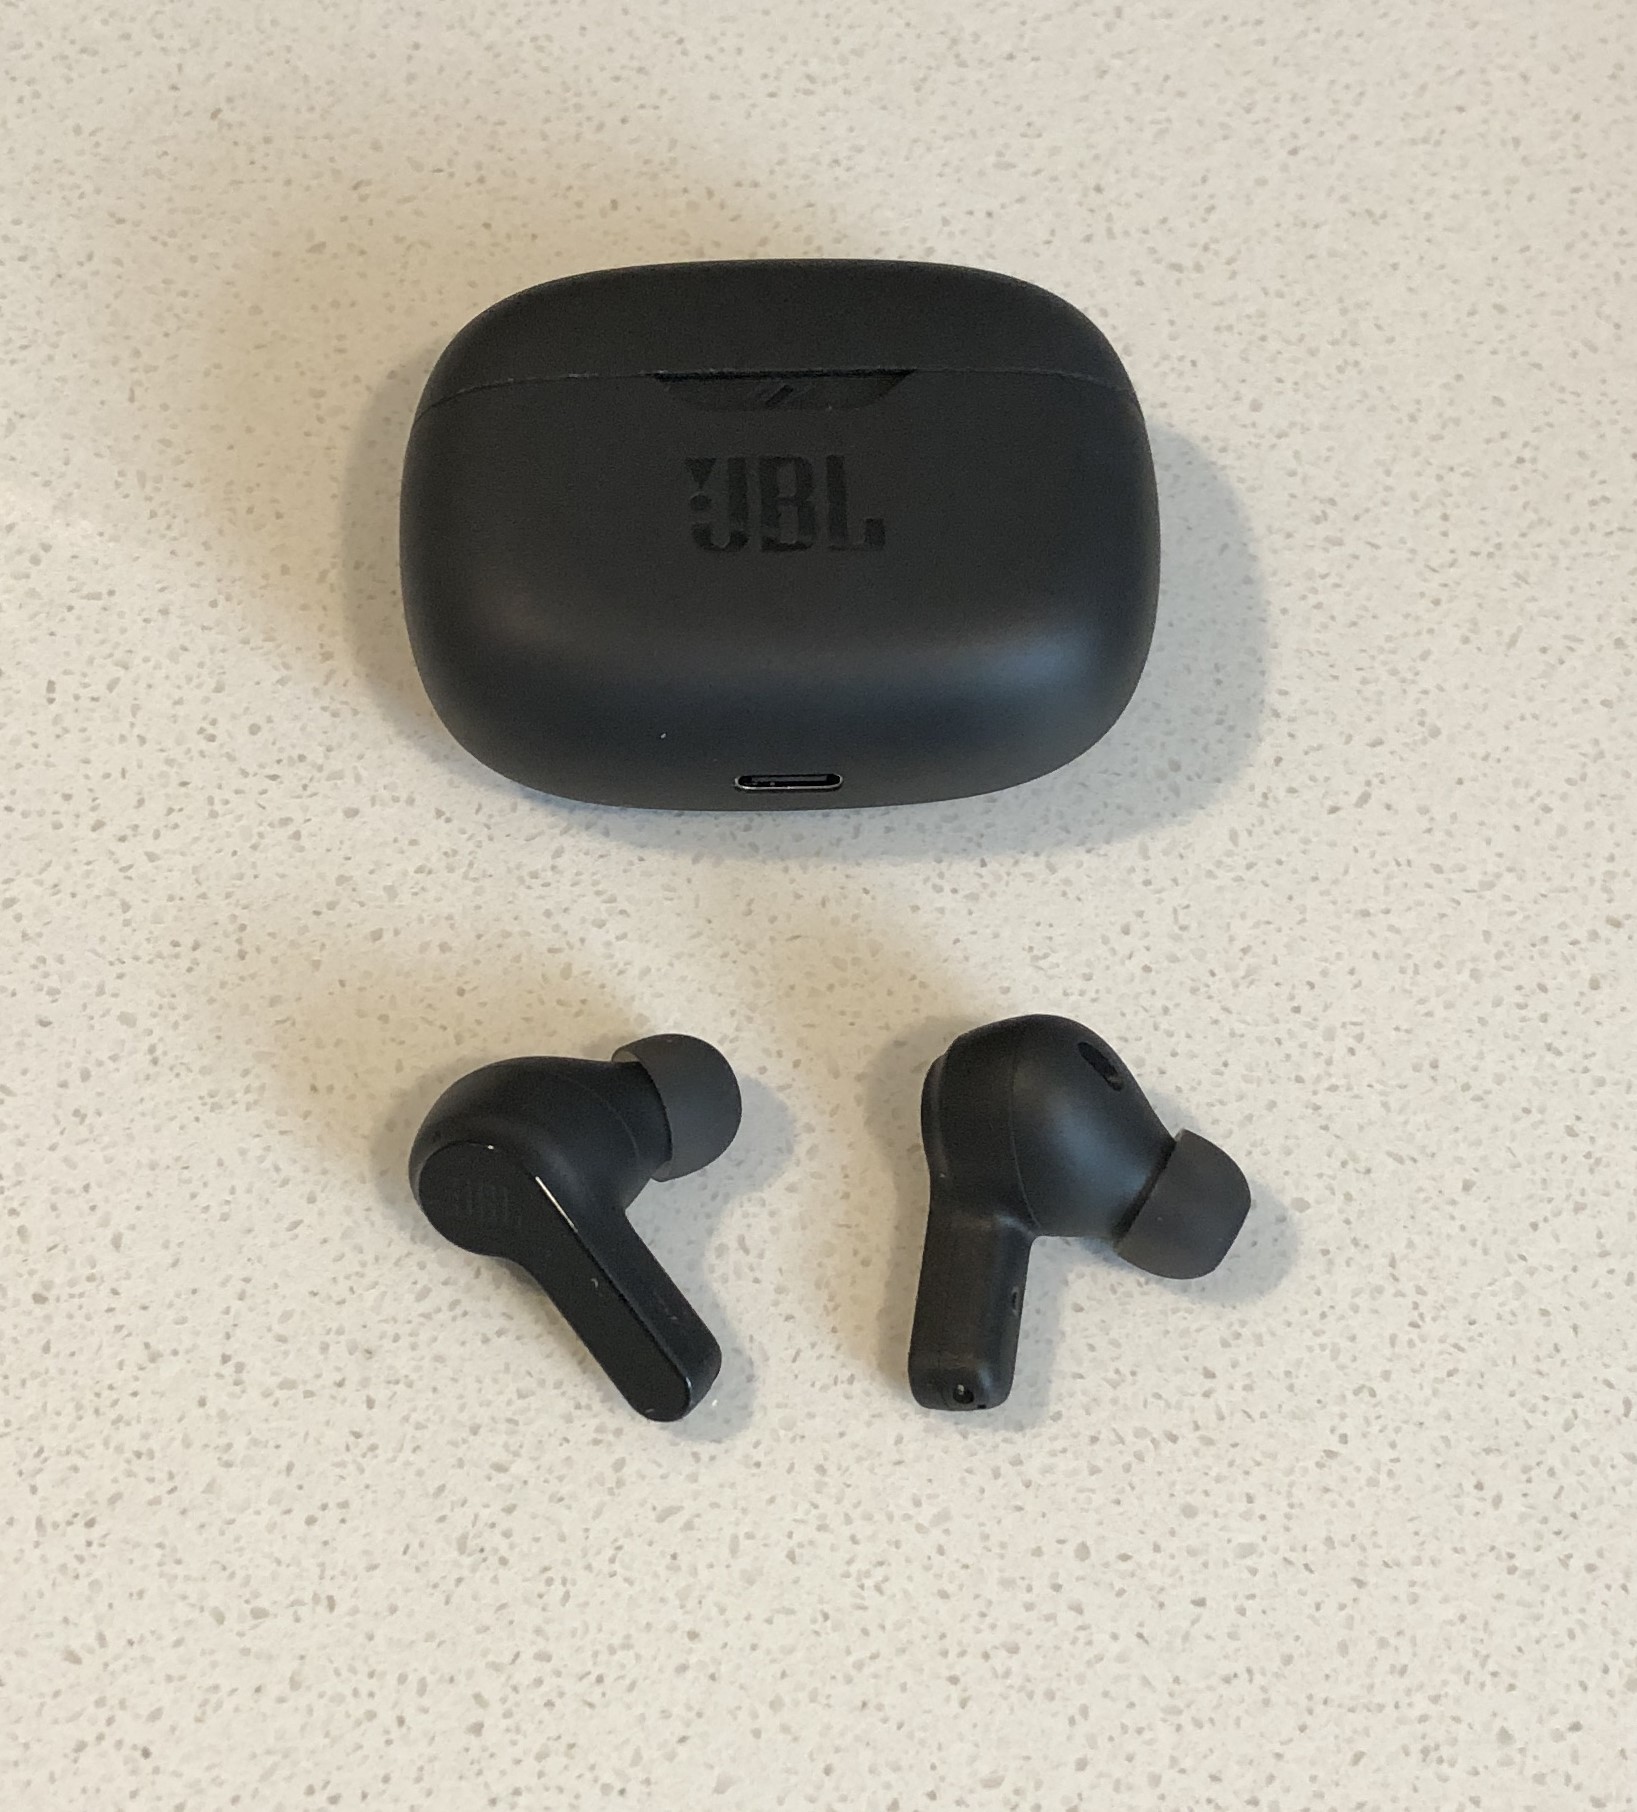 JBL Vibe Beam charging case and wireless earbuds